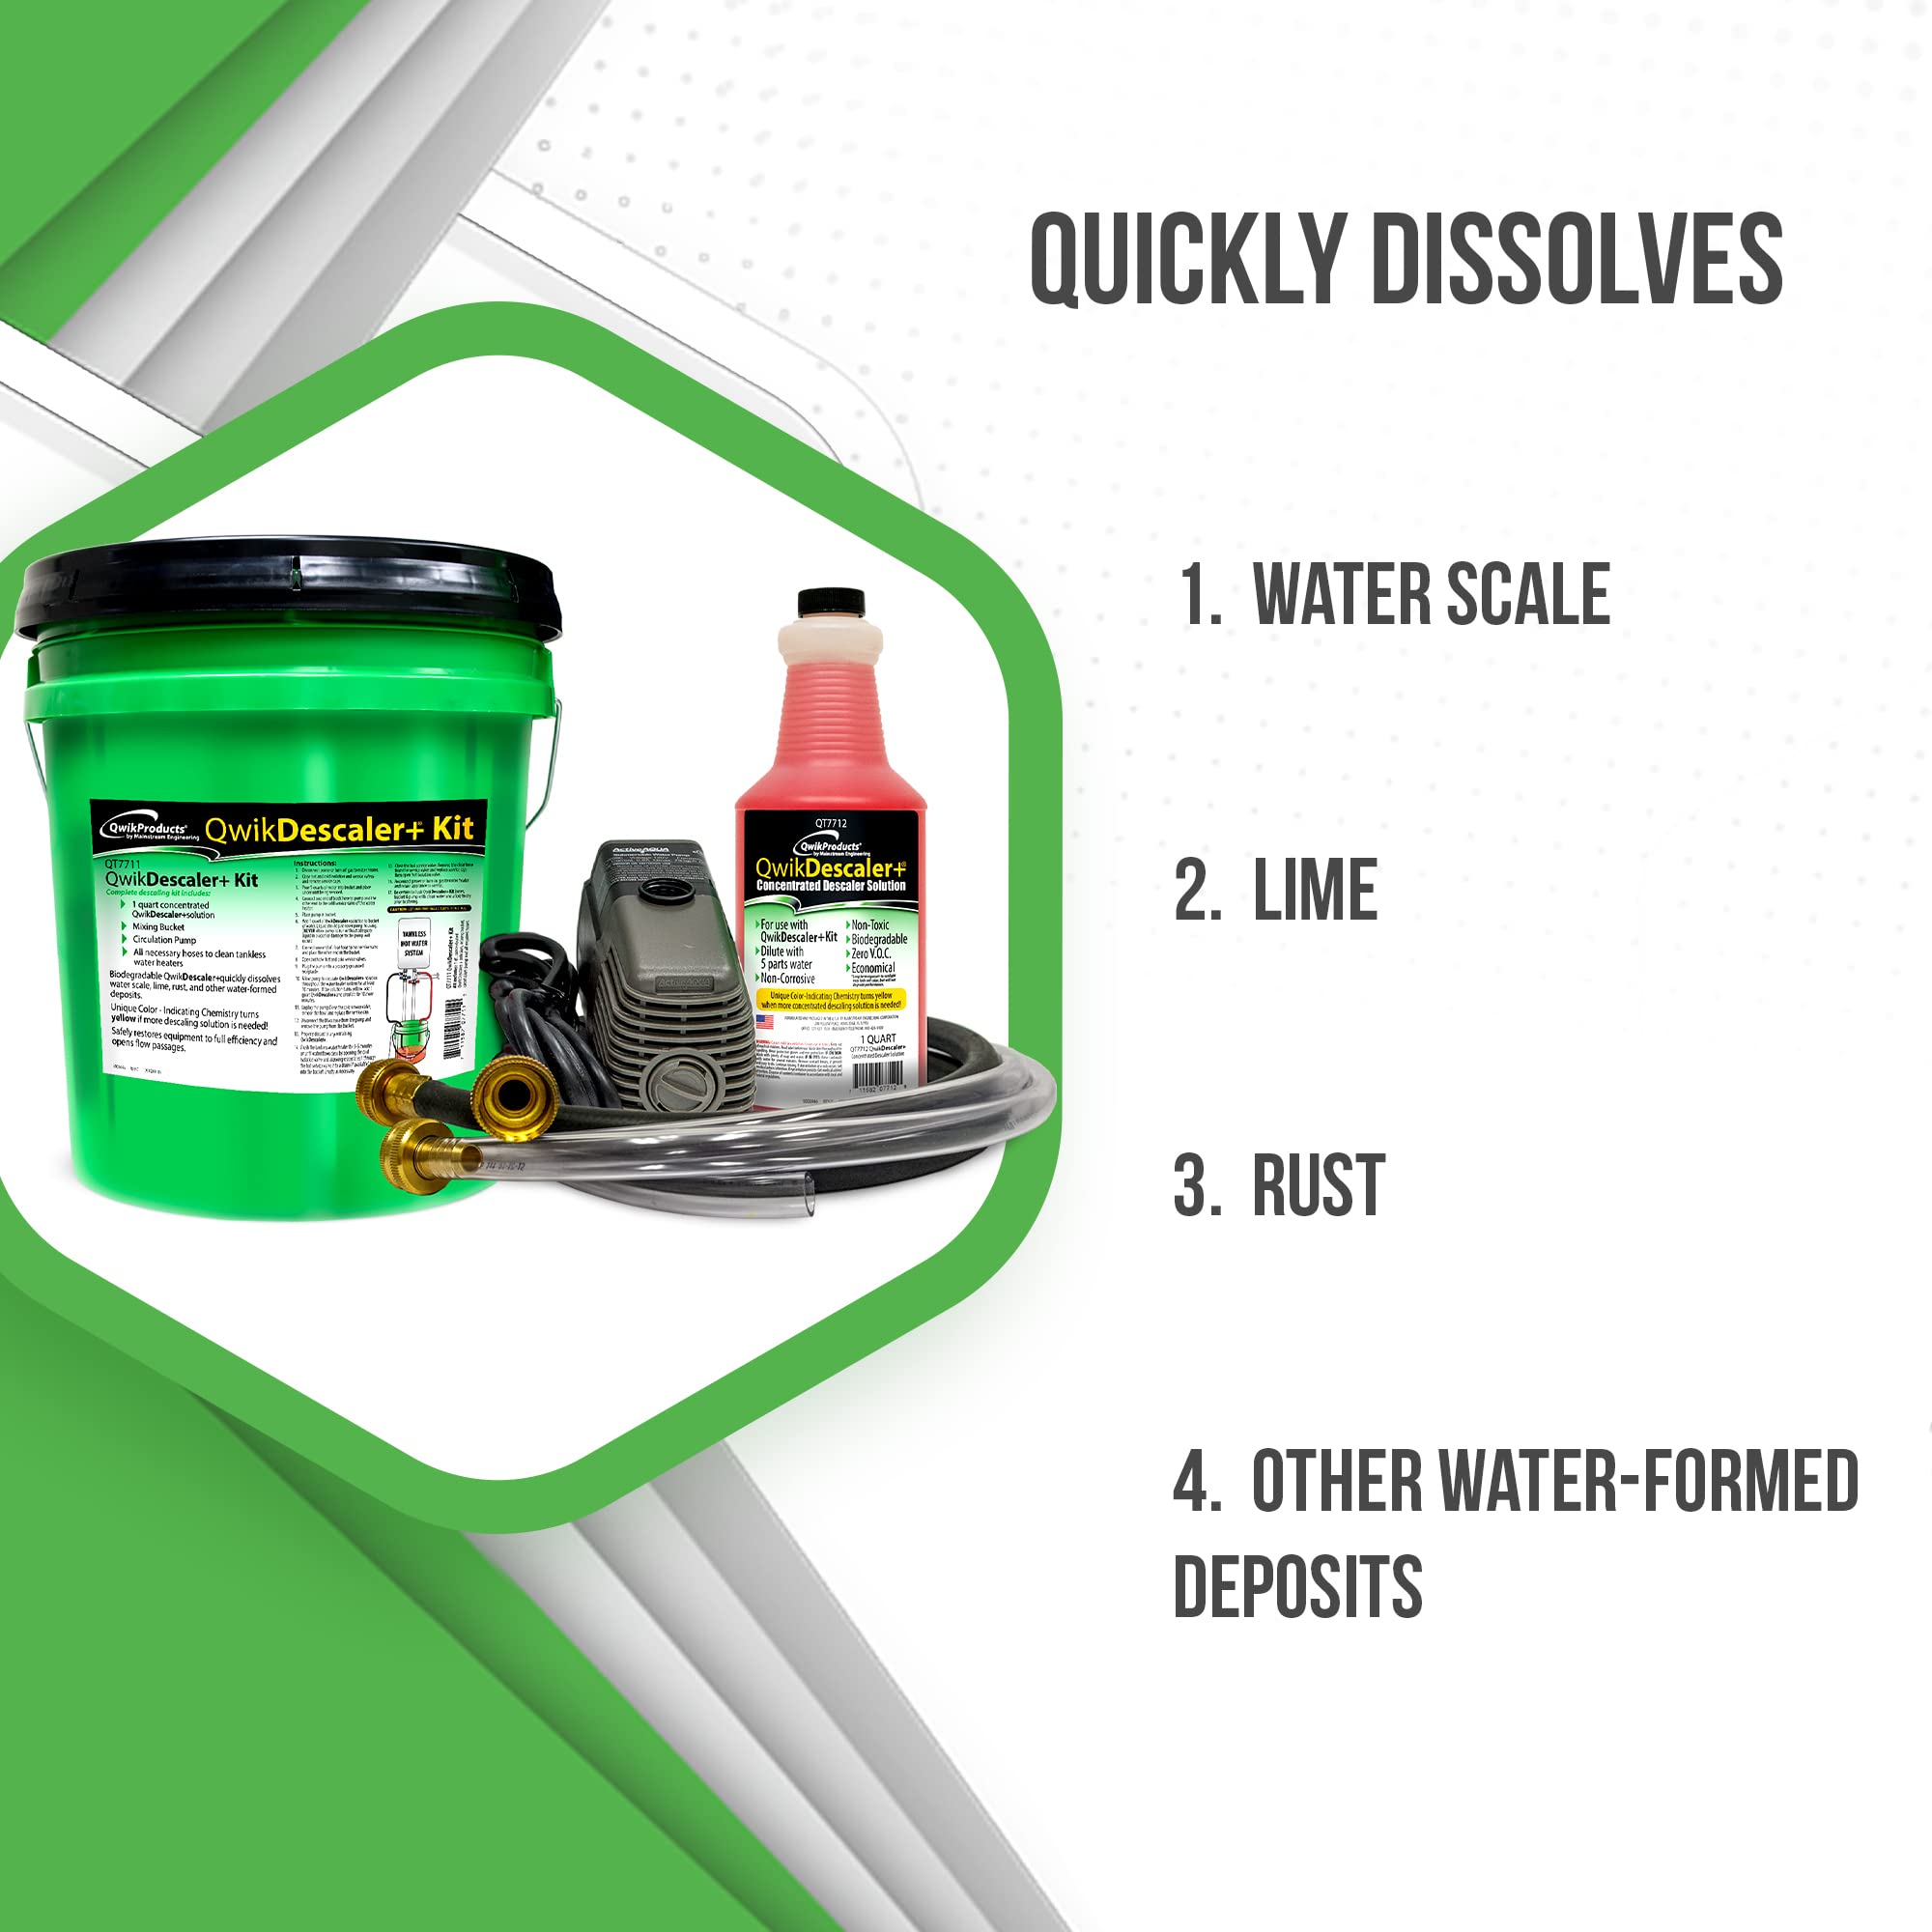 QwikDescaler + Concentrated Descaler Solution, Tankless Water Heater Descaling Solvent for Heat Exchanger, Quickly Dissolves Scale, Lime, Tarnish and Deposits, 1 Gallon